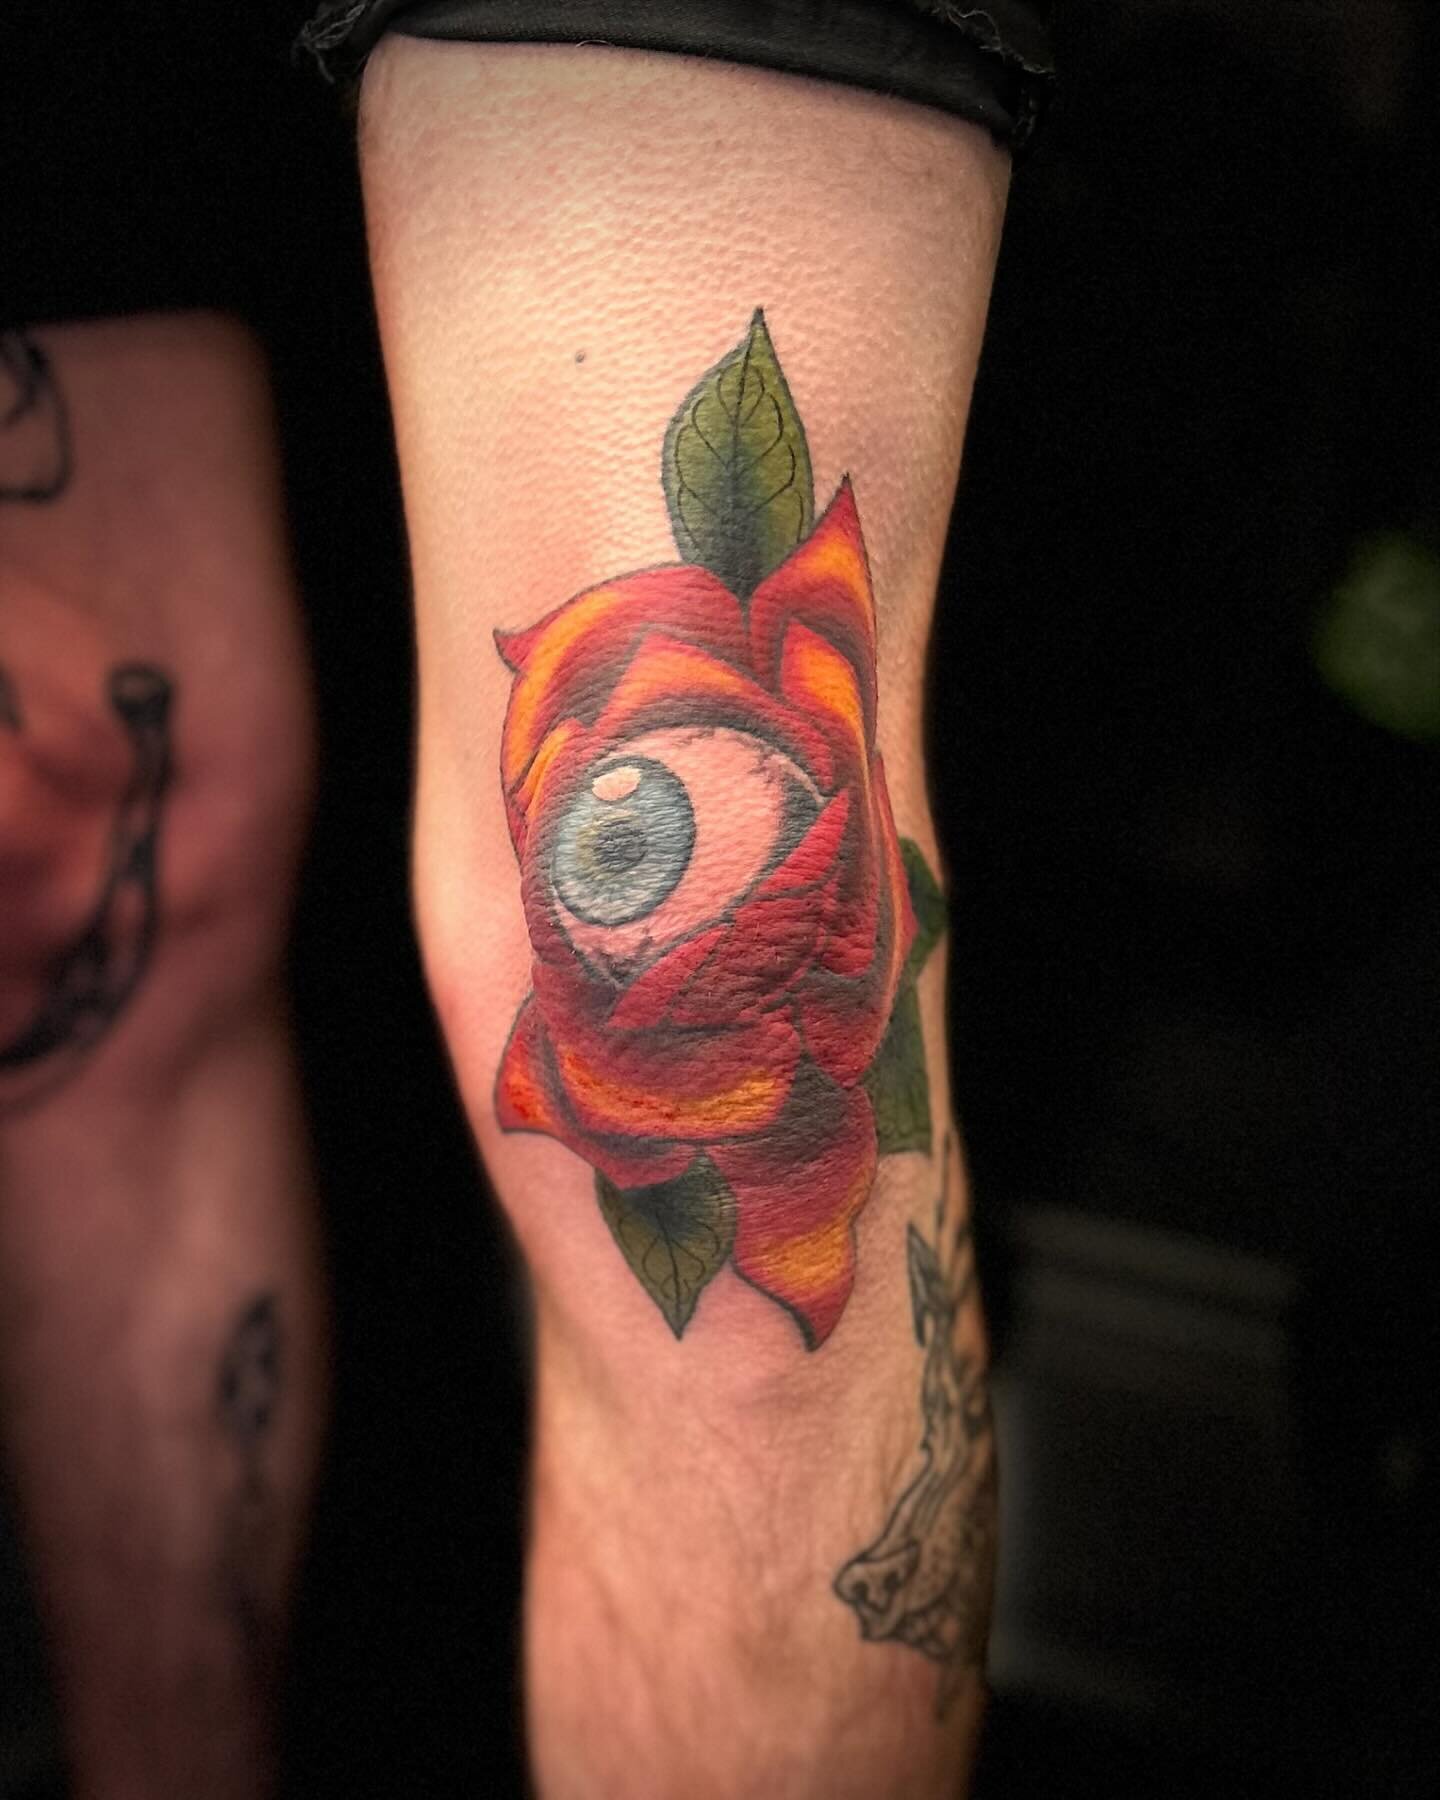 Touched up the color and added some veins to the leaves on my husband&rsquo;s knee banger. Thanks for always being such a trooper Noah!

#rose #eyeball #flower #kneetattoo #rosetattoo #pdxroses #traditionaltattoo #neotraditionaltattoo #pseudotraditio